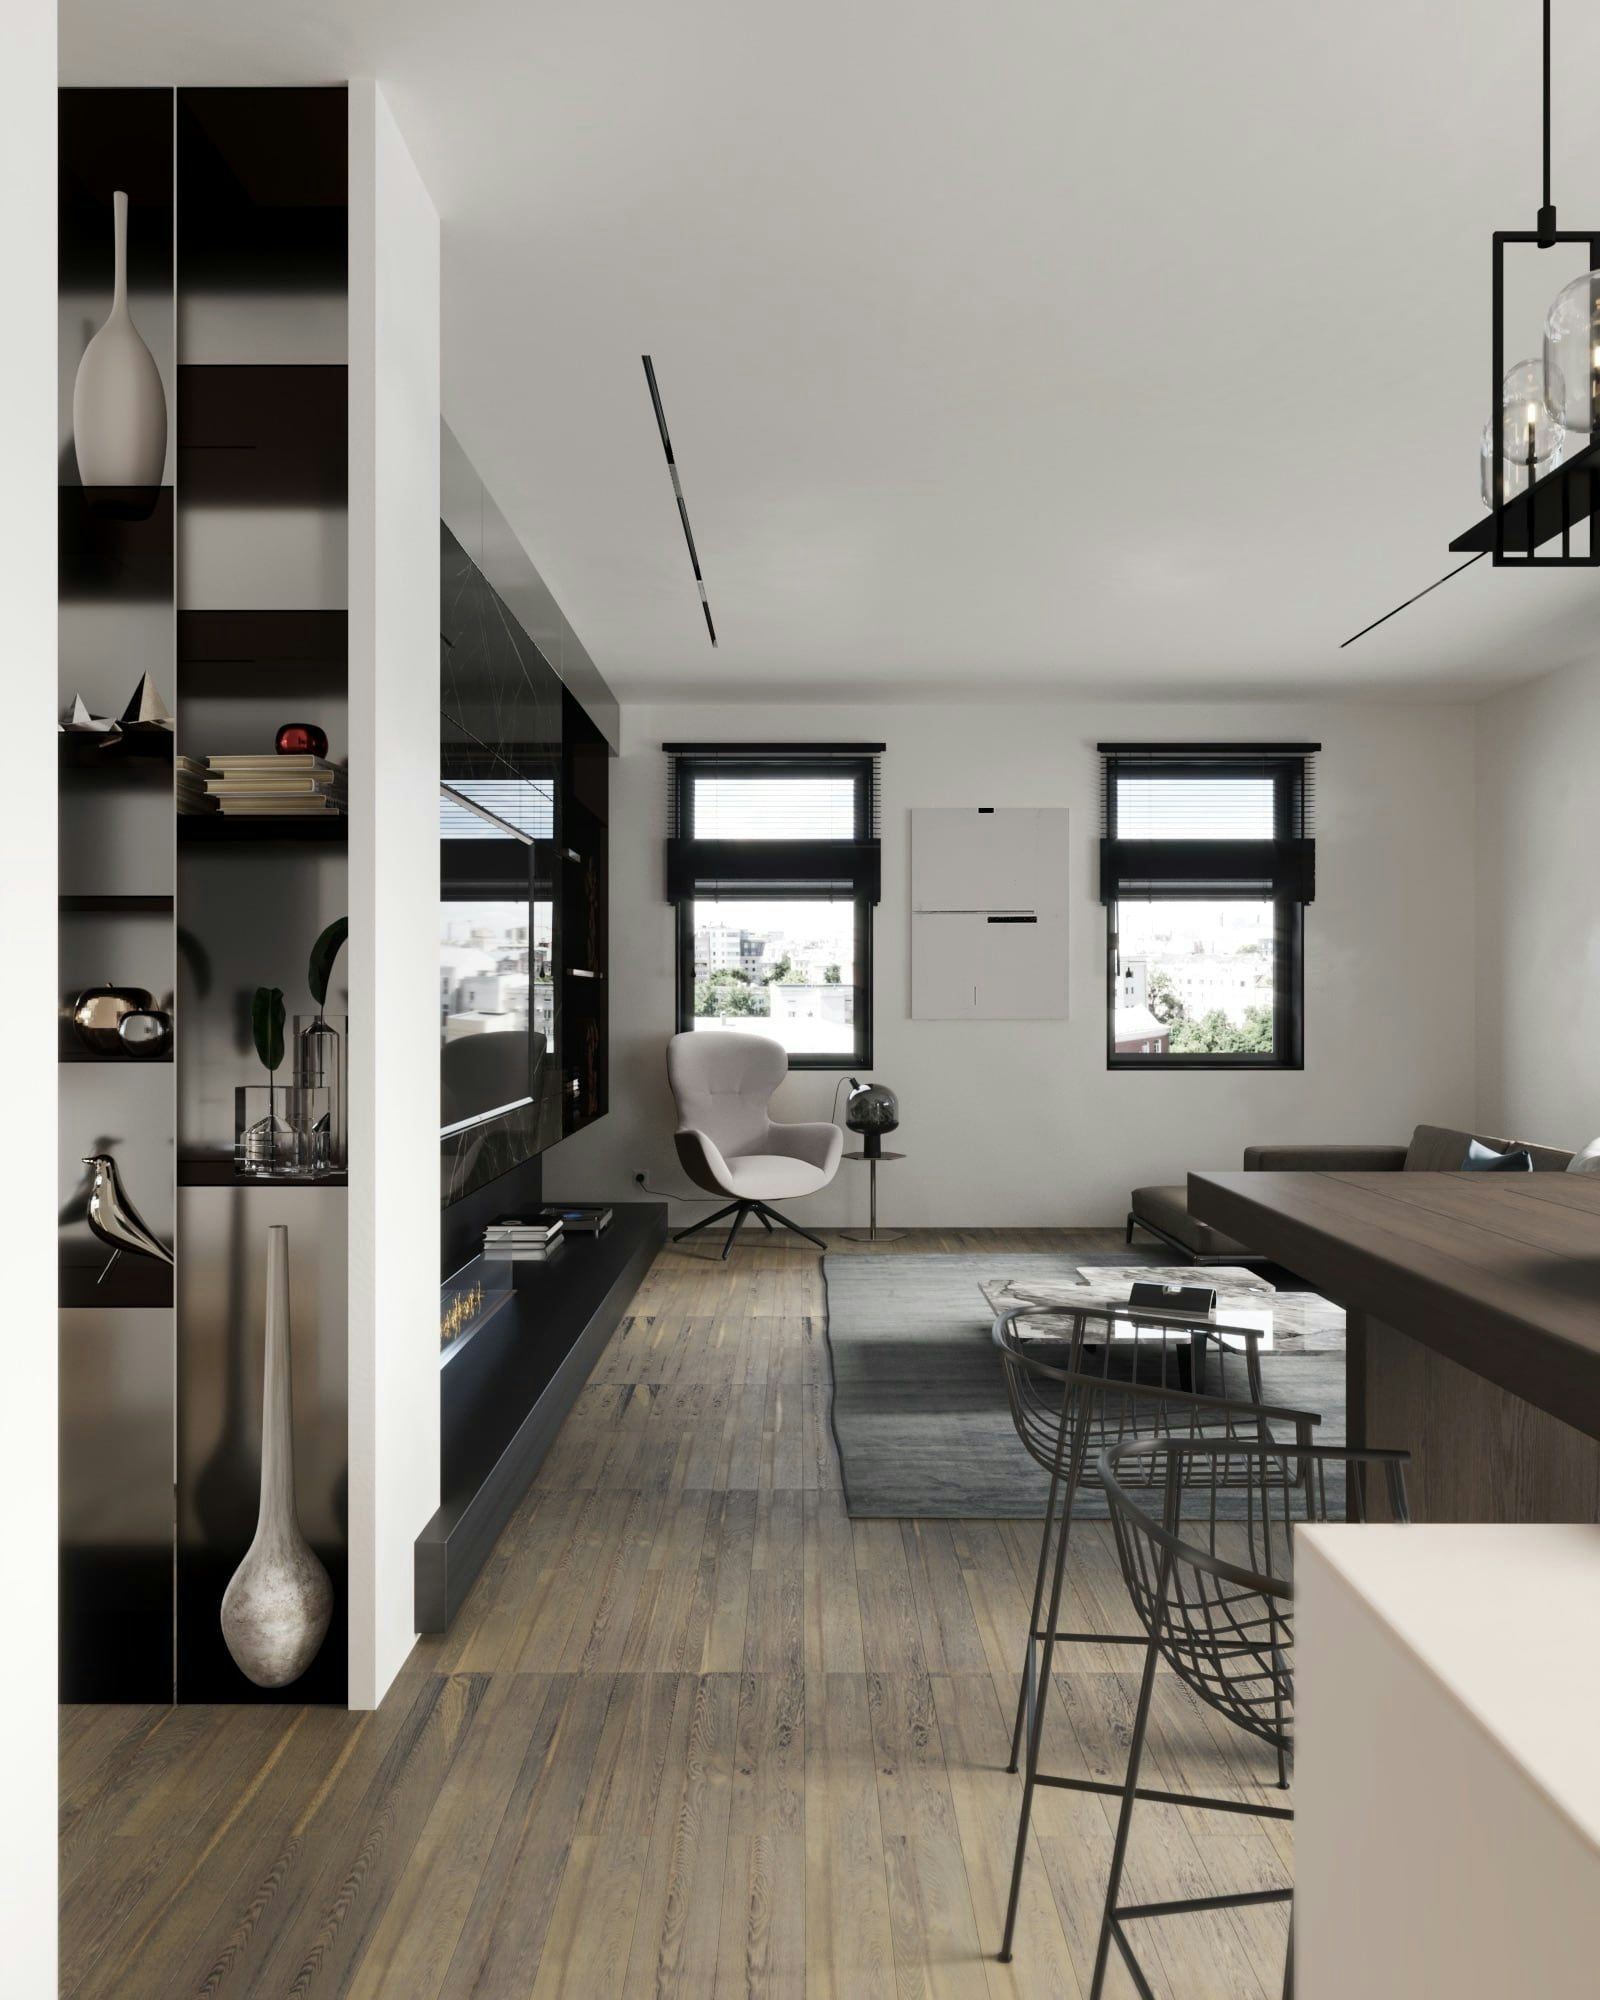 3D Interior Architectural visualization of living space in a minimalistic modern apartment in Berlin